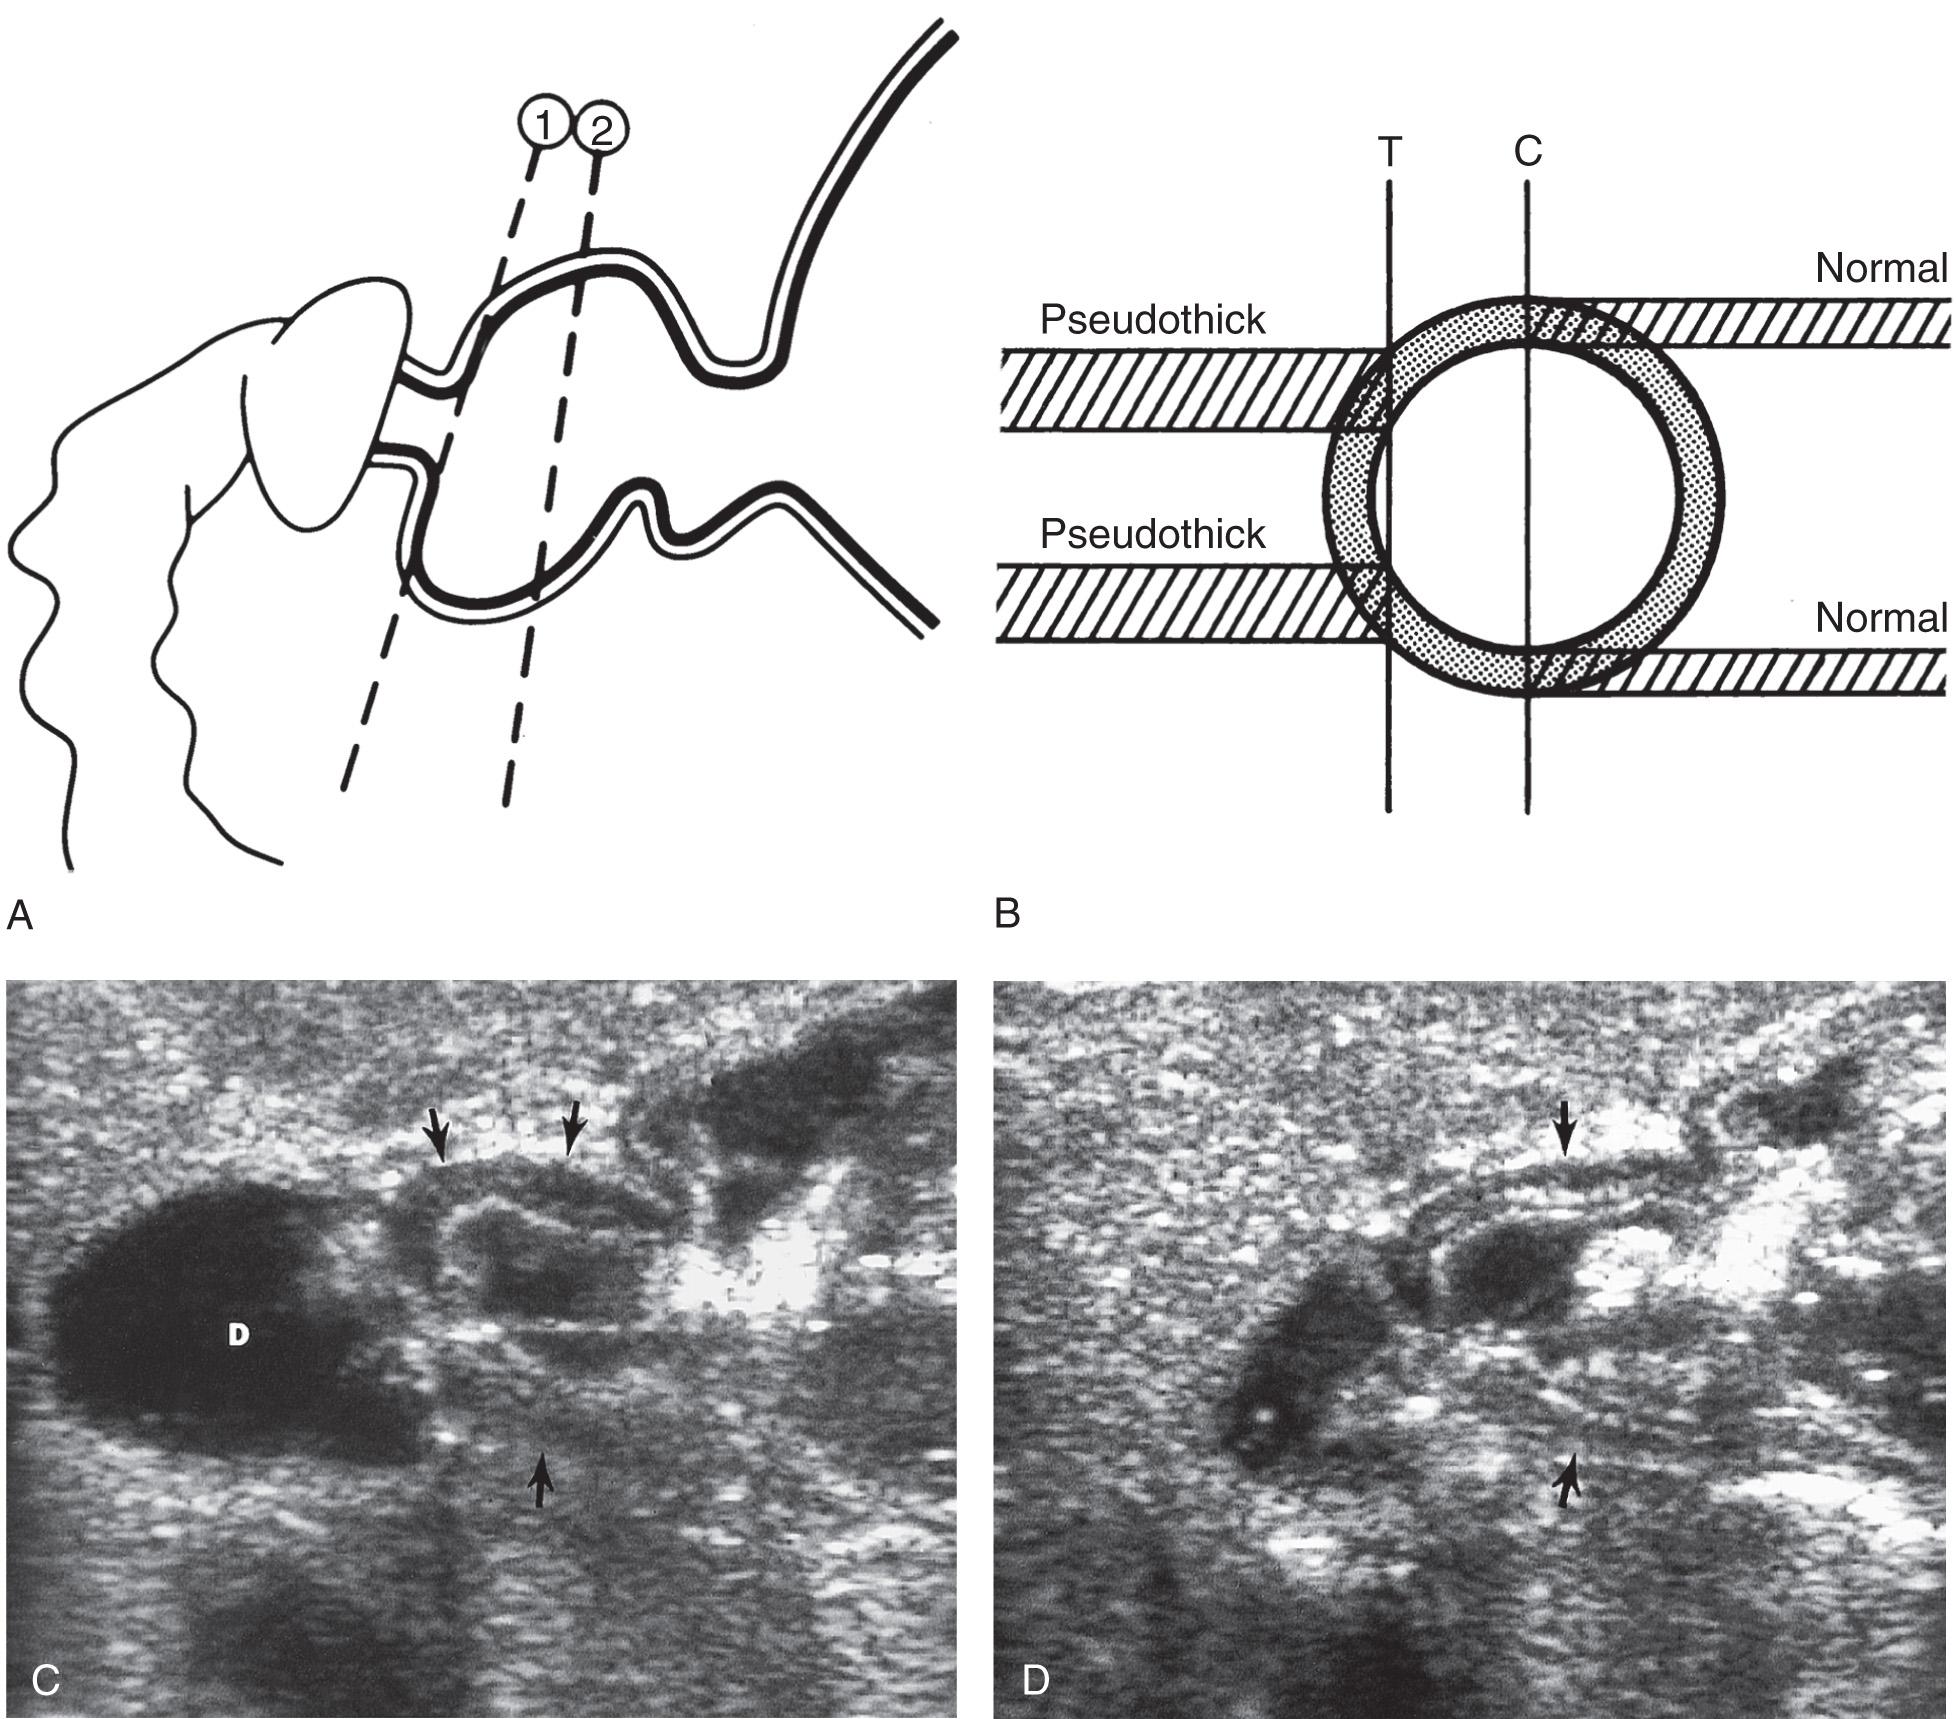 FIG. 53.4, Pyloric Muscle Tangential Imaging Artifacts.